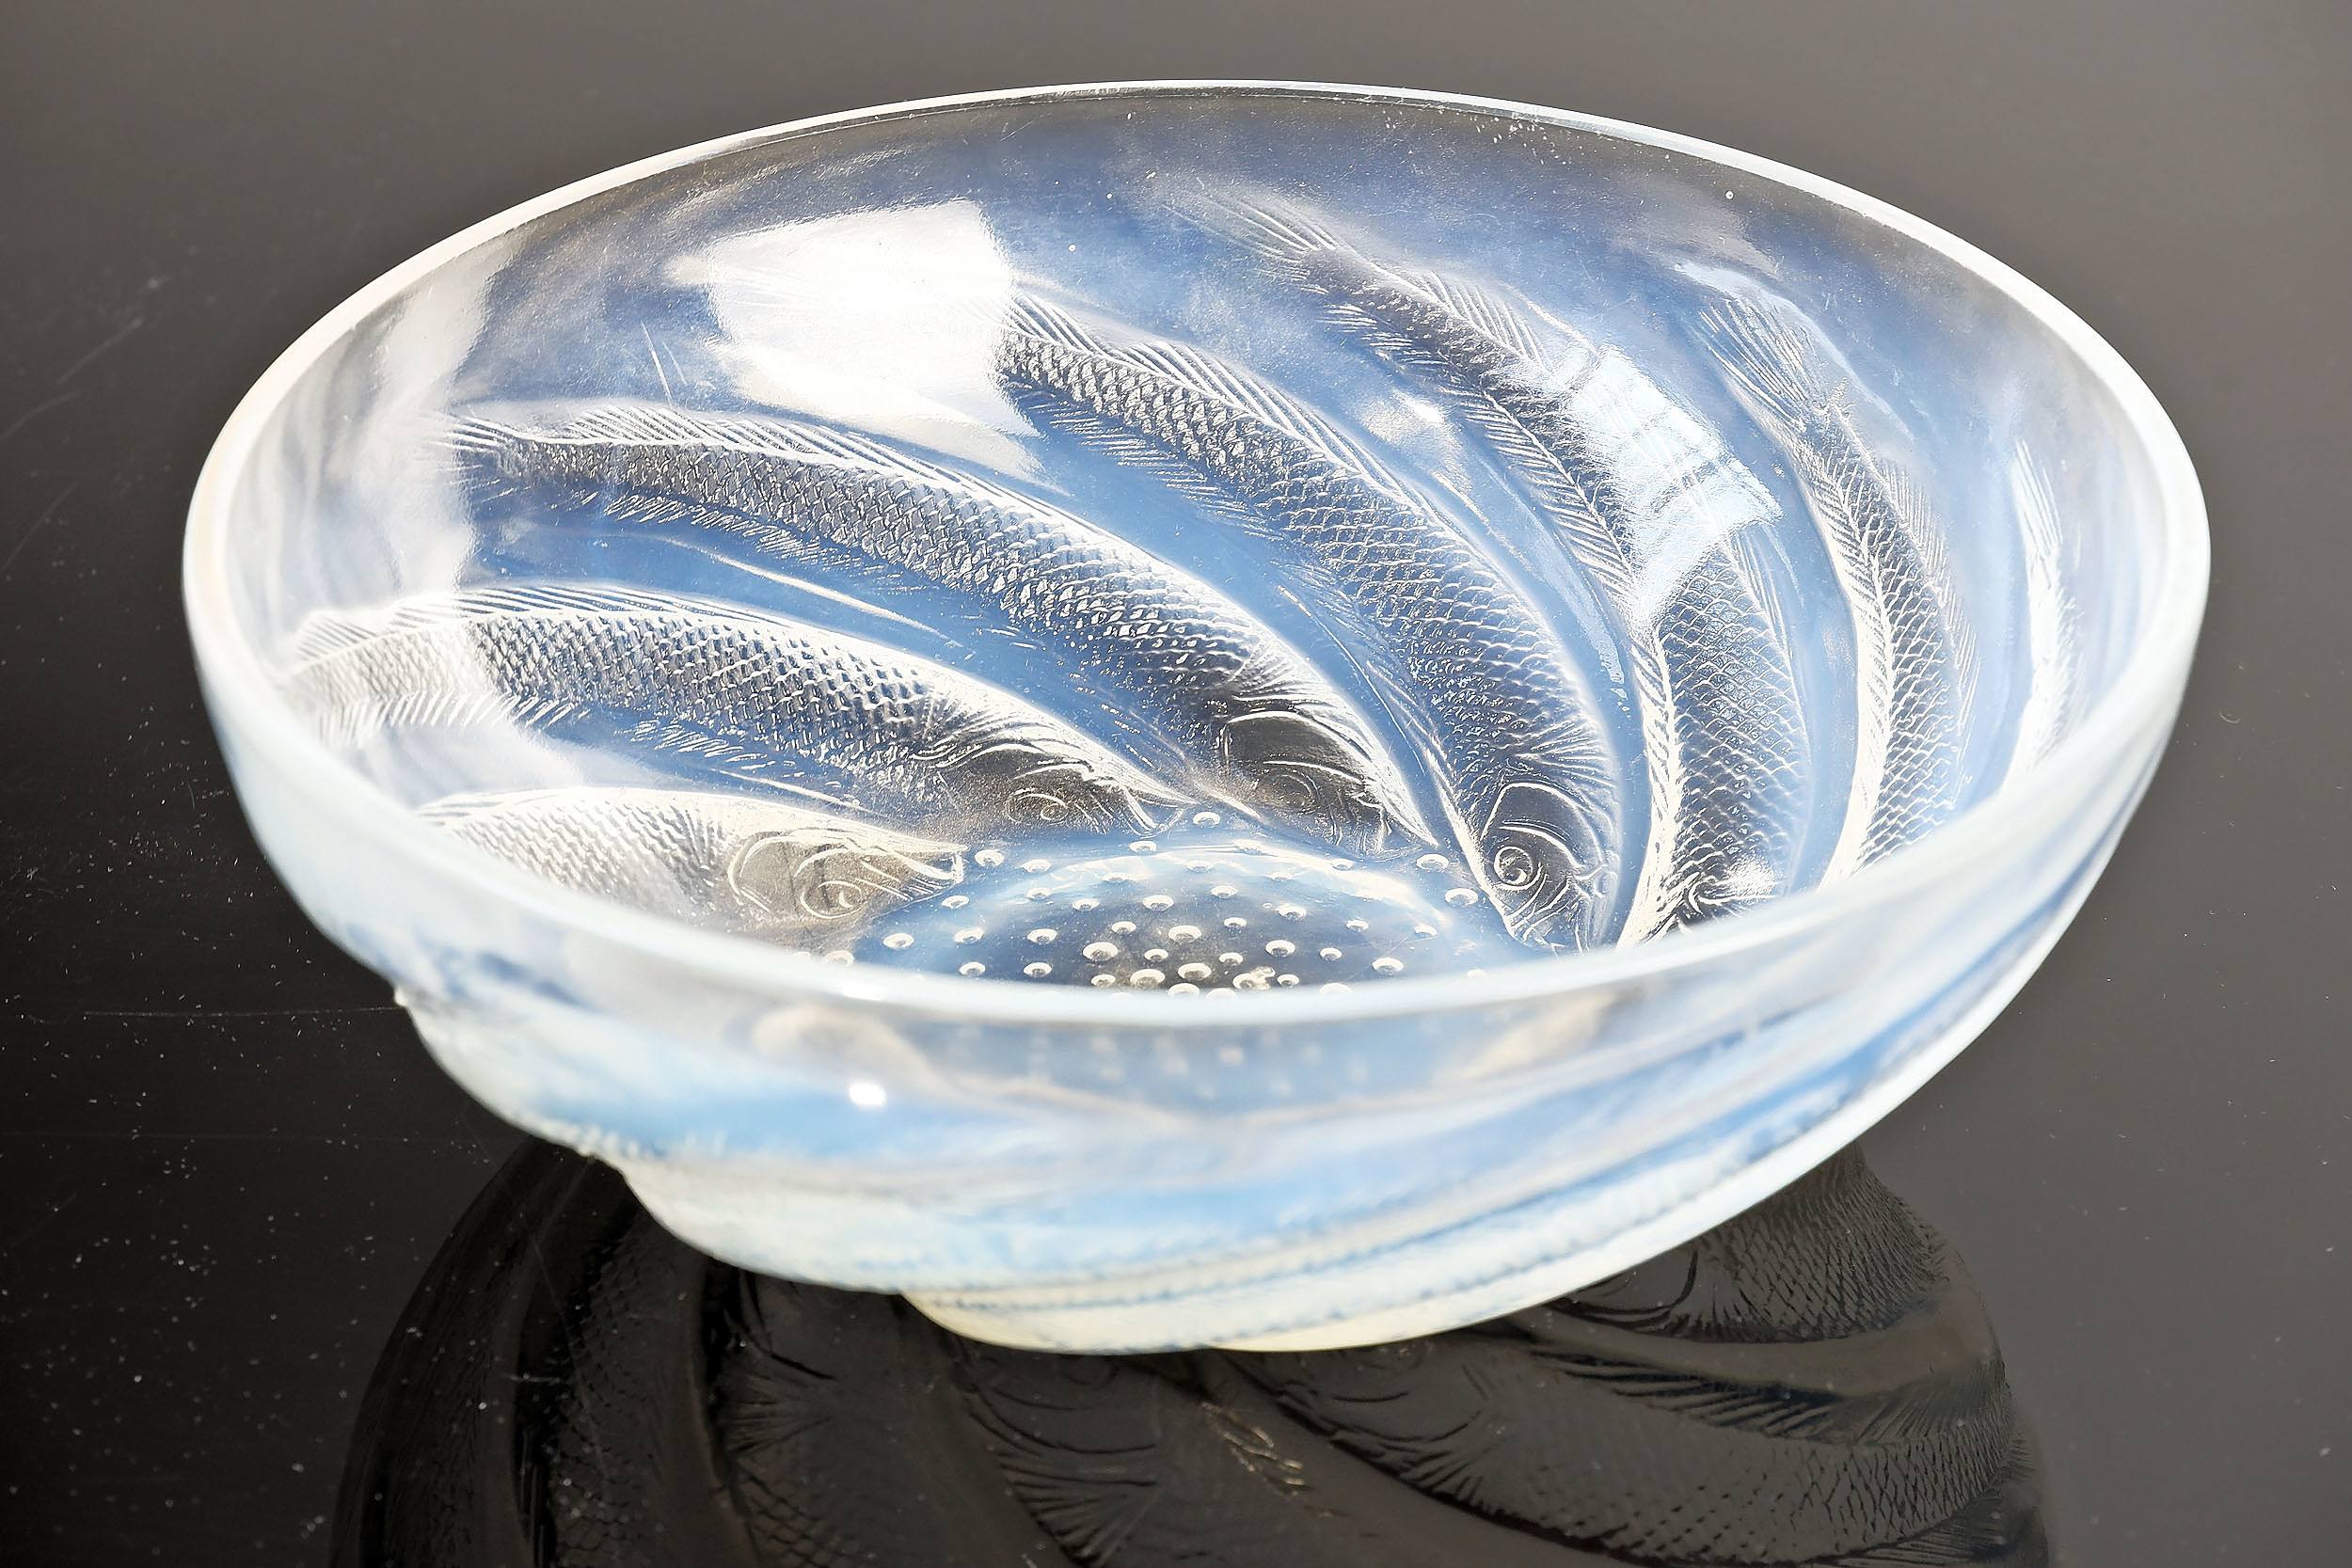 'Rene Lalique (1860-1945) Poissons Bowl in Opalescent Glass'